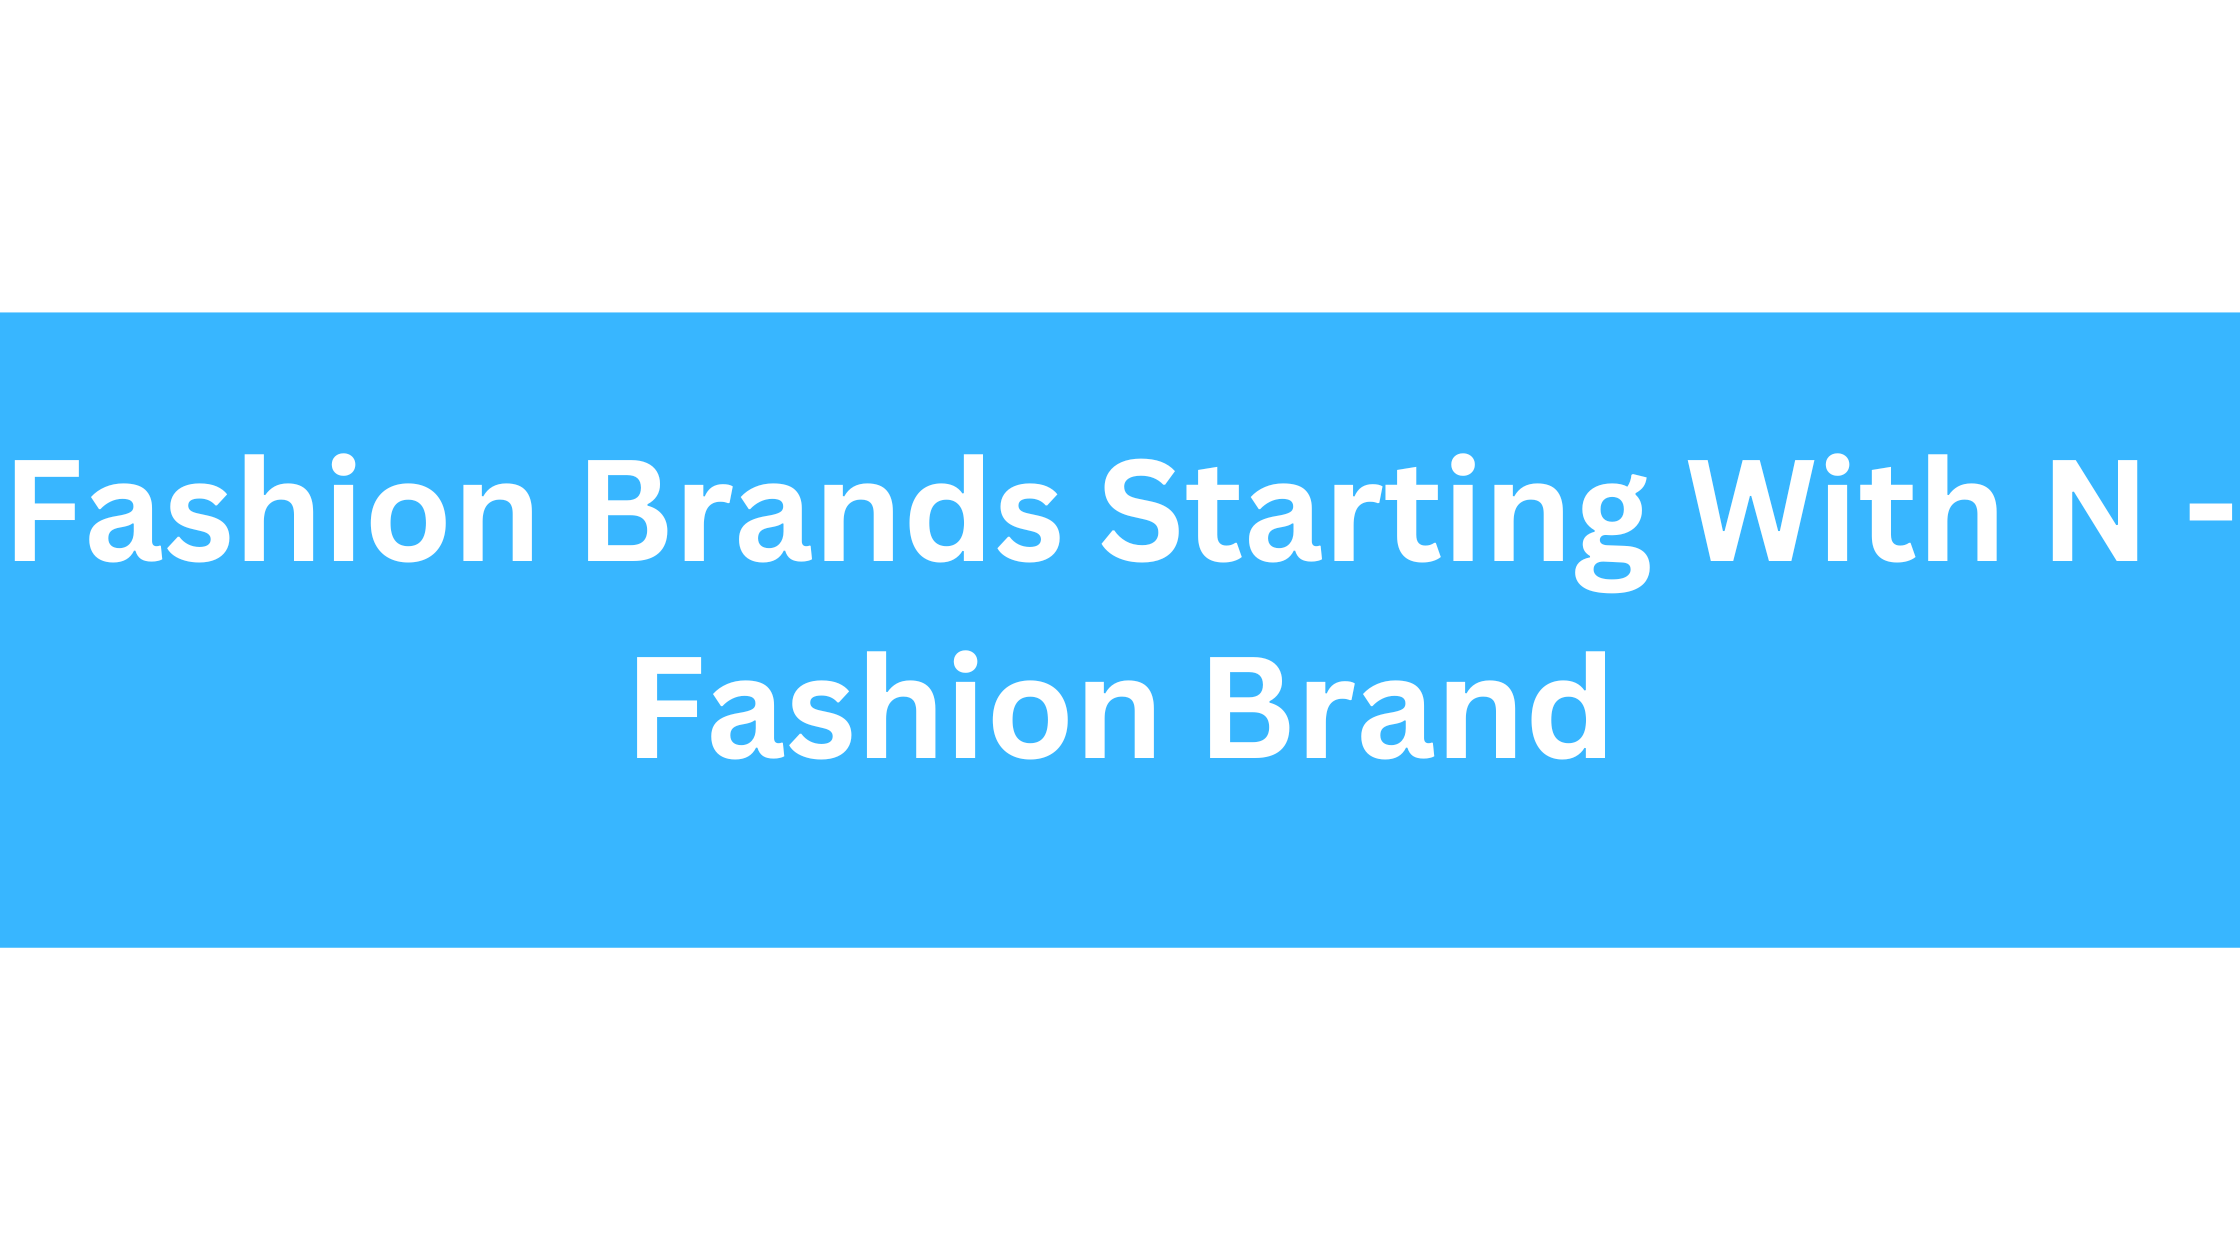 Fashion Brands Starting With N